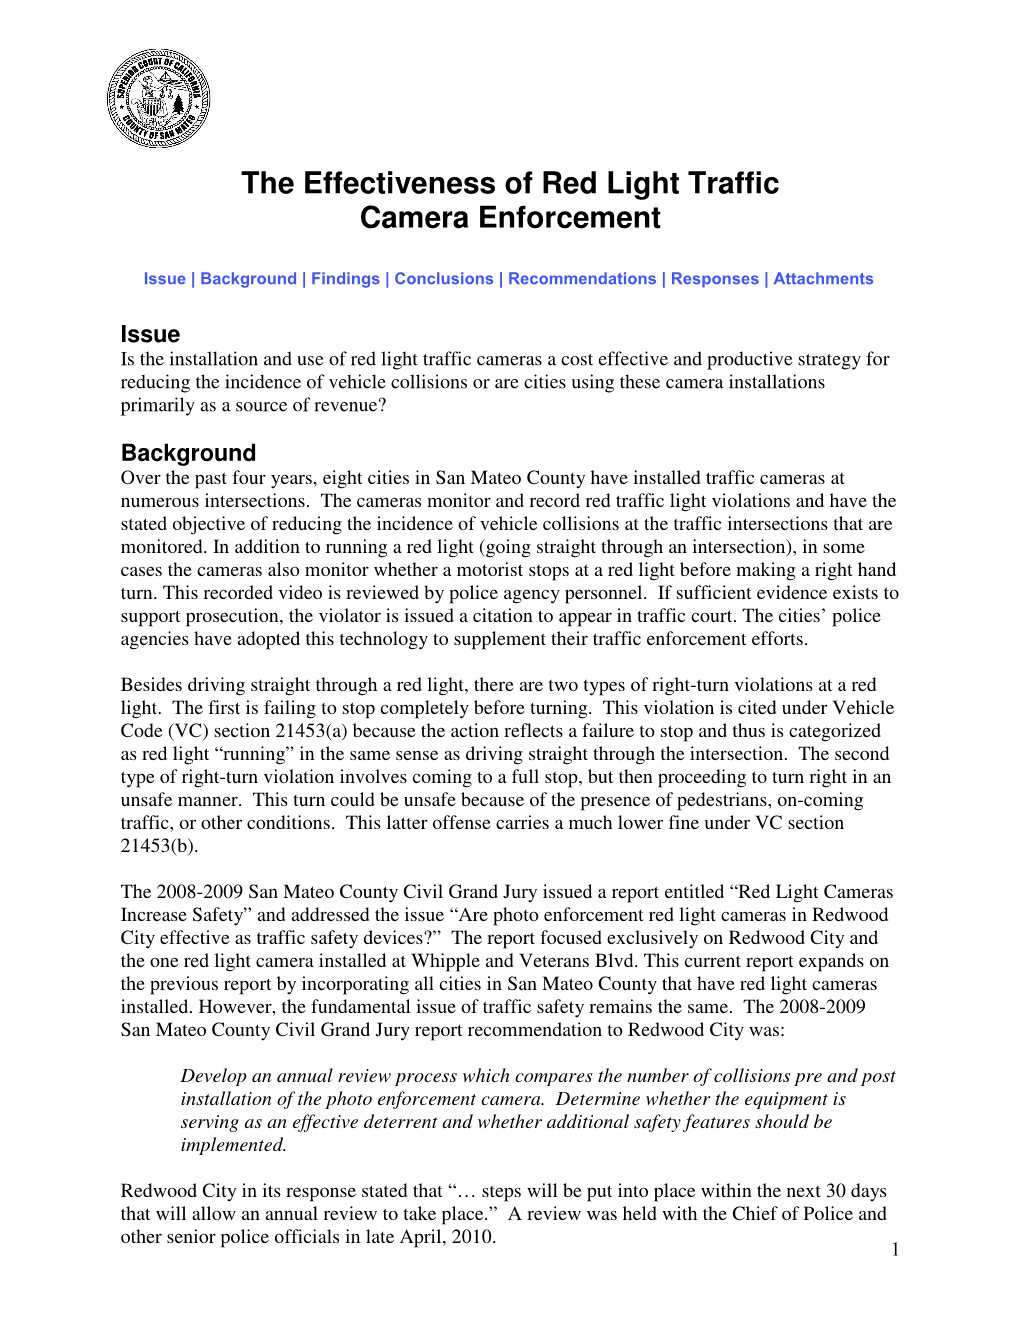 The Effectiveness of Red Light Traffic Camera Enforcement